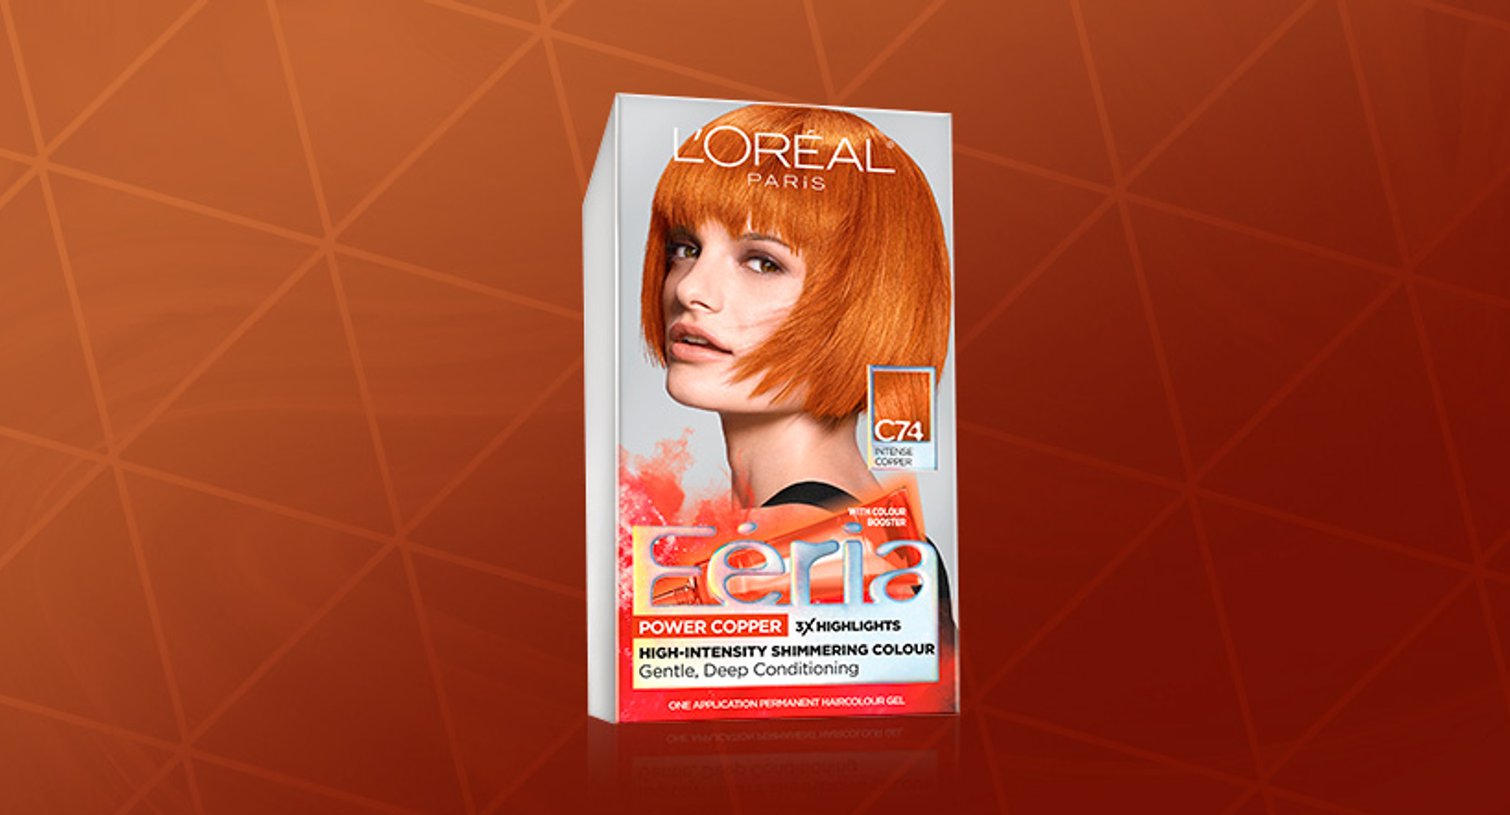 Loreal Paris BMAG Slideshow How to Get a Bold Red Hair Color SLIDE 7